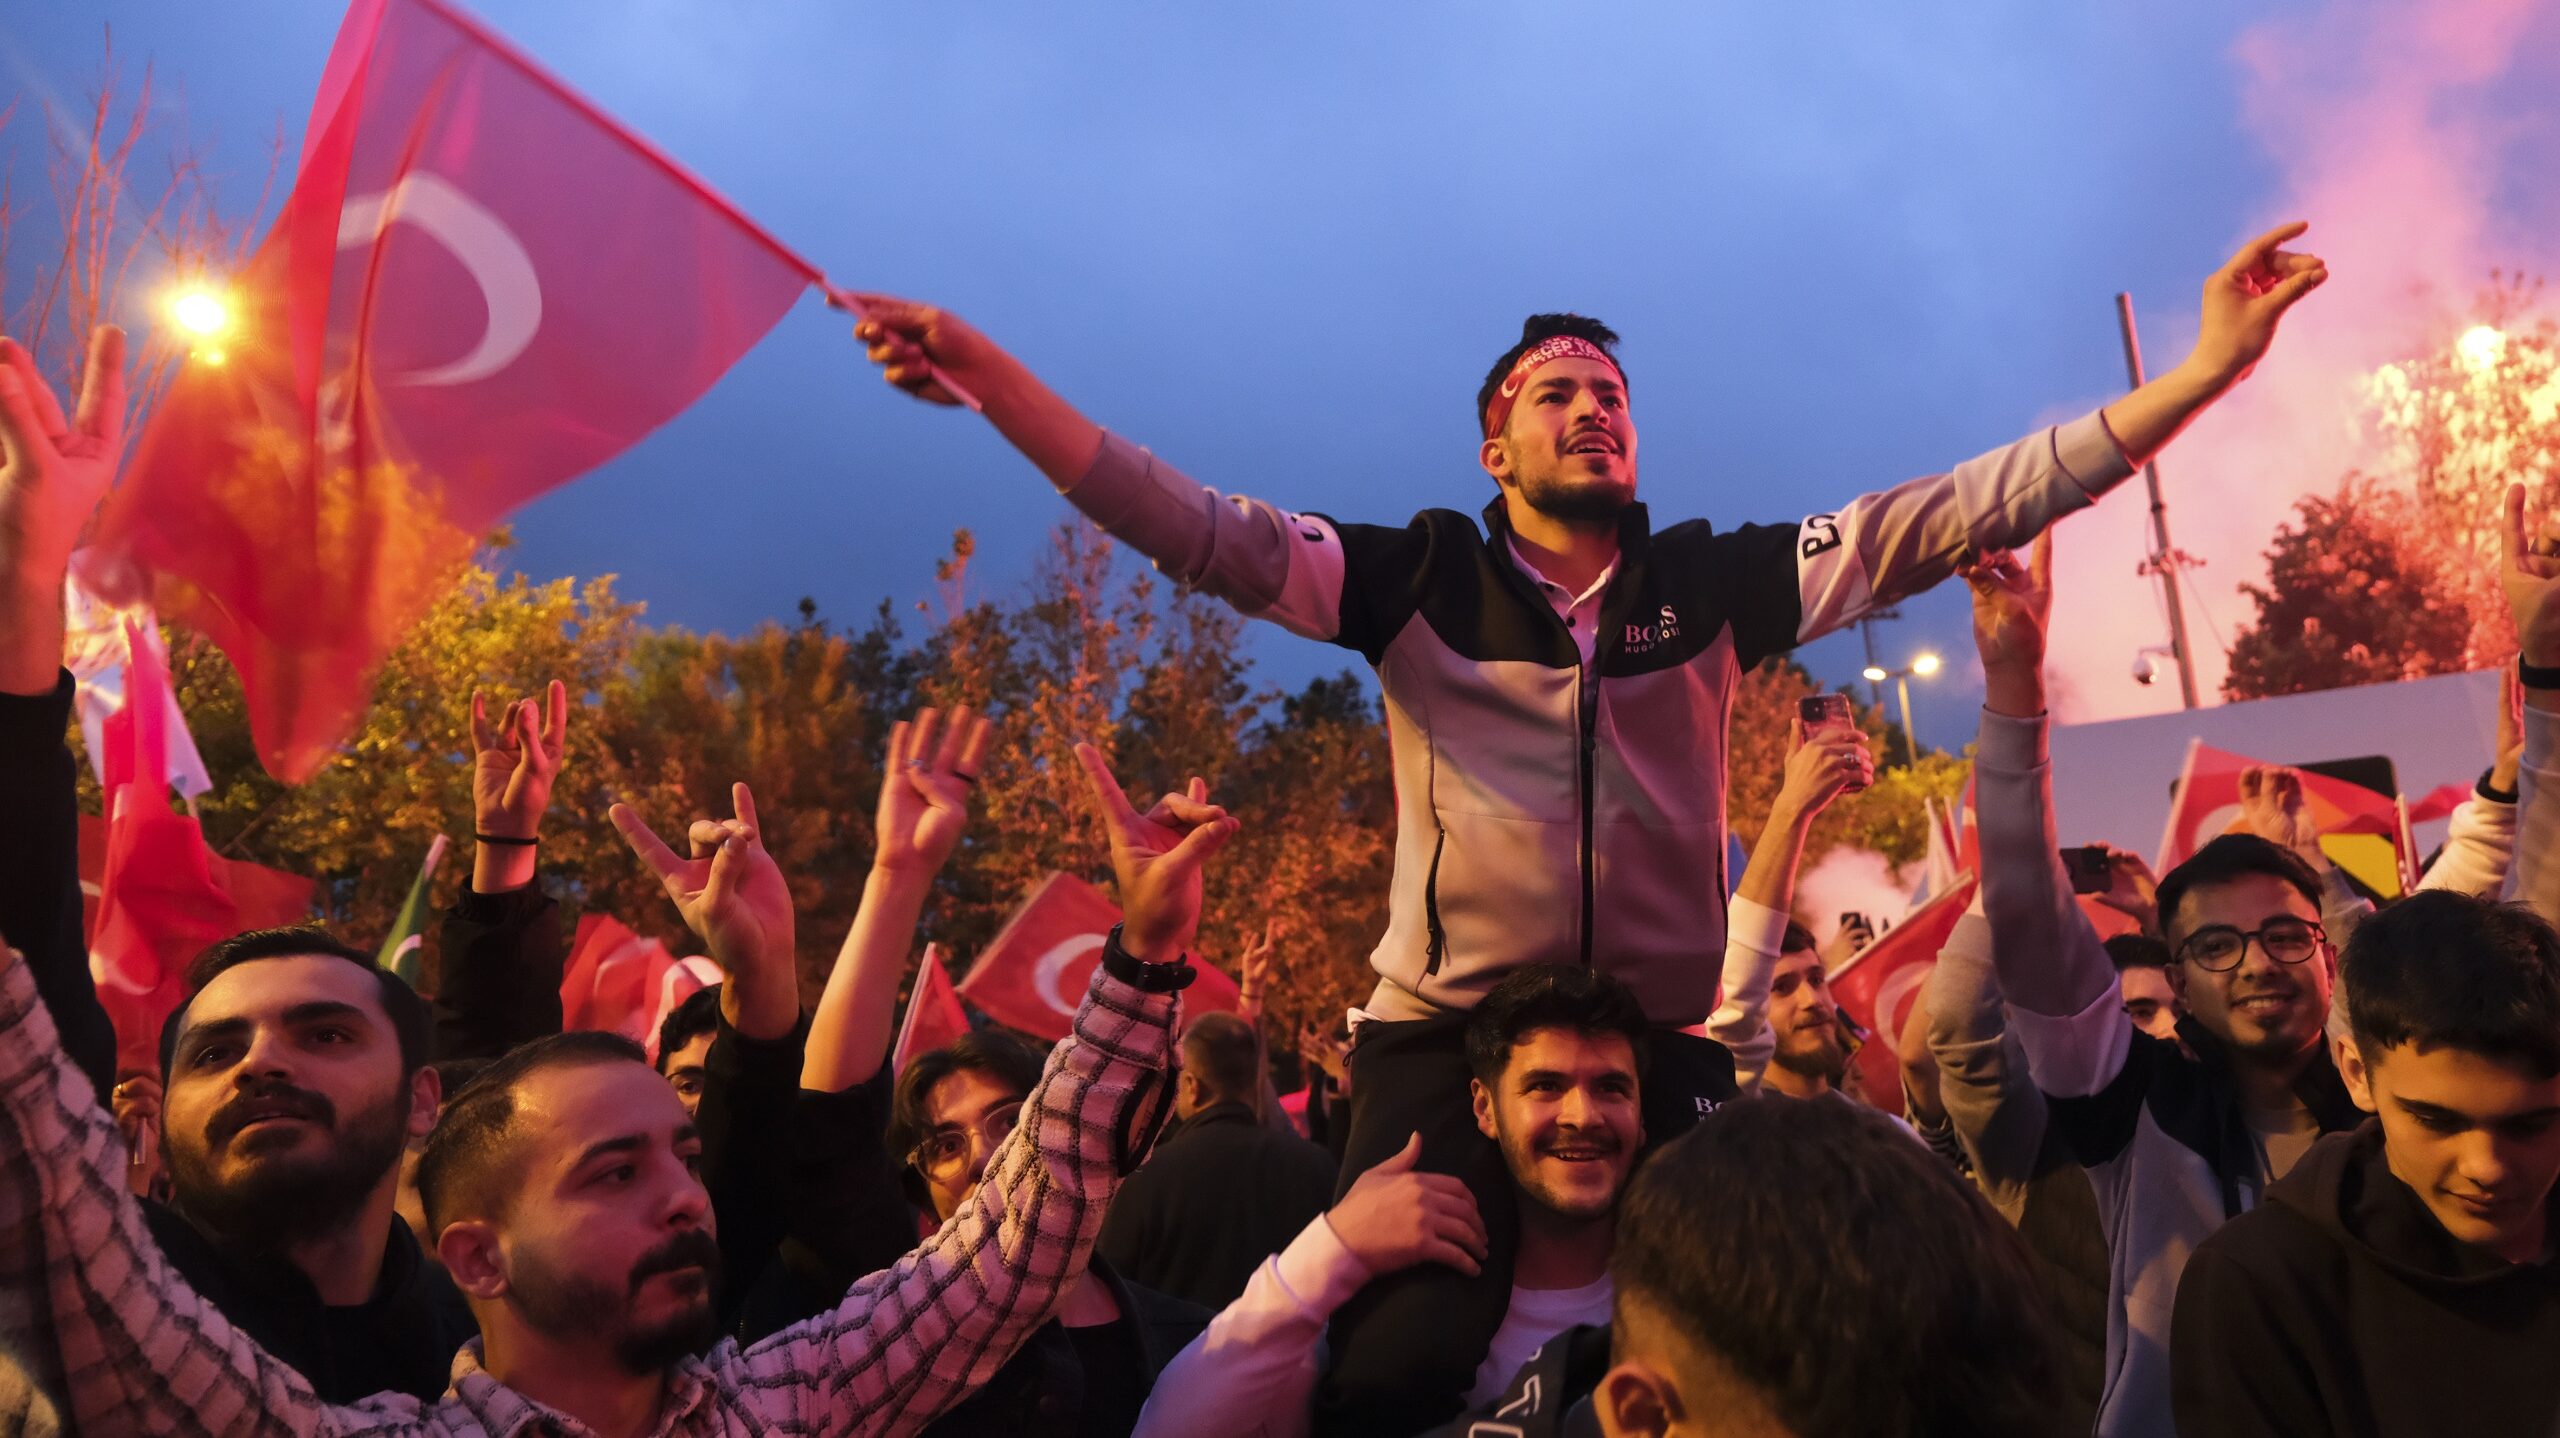 Erdoğan Triumphs in Turkish Presidential Election, Bolstering His Hold on Power